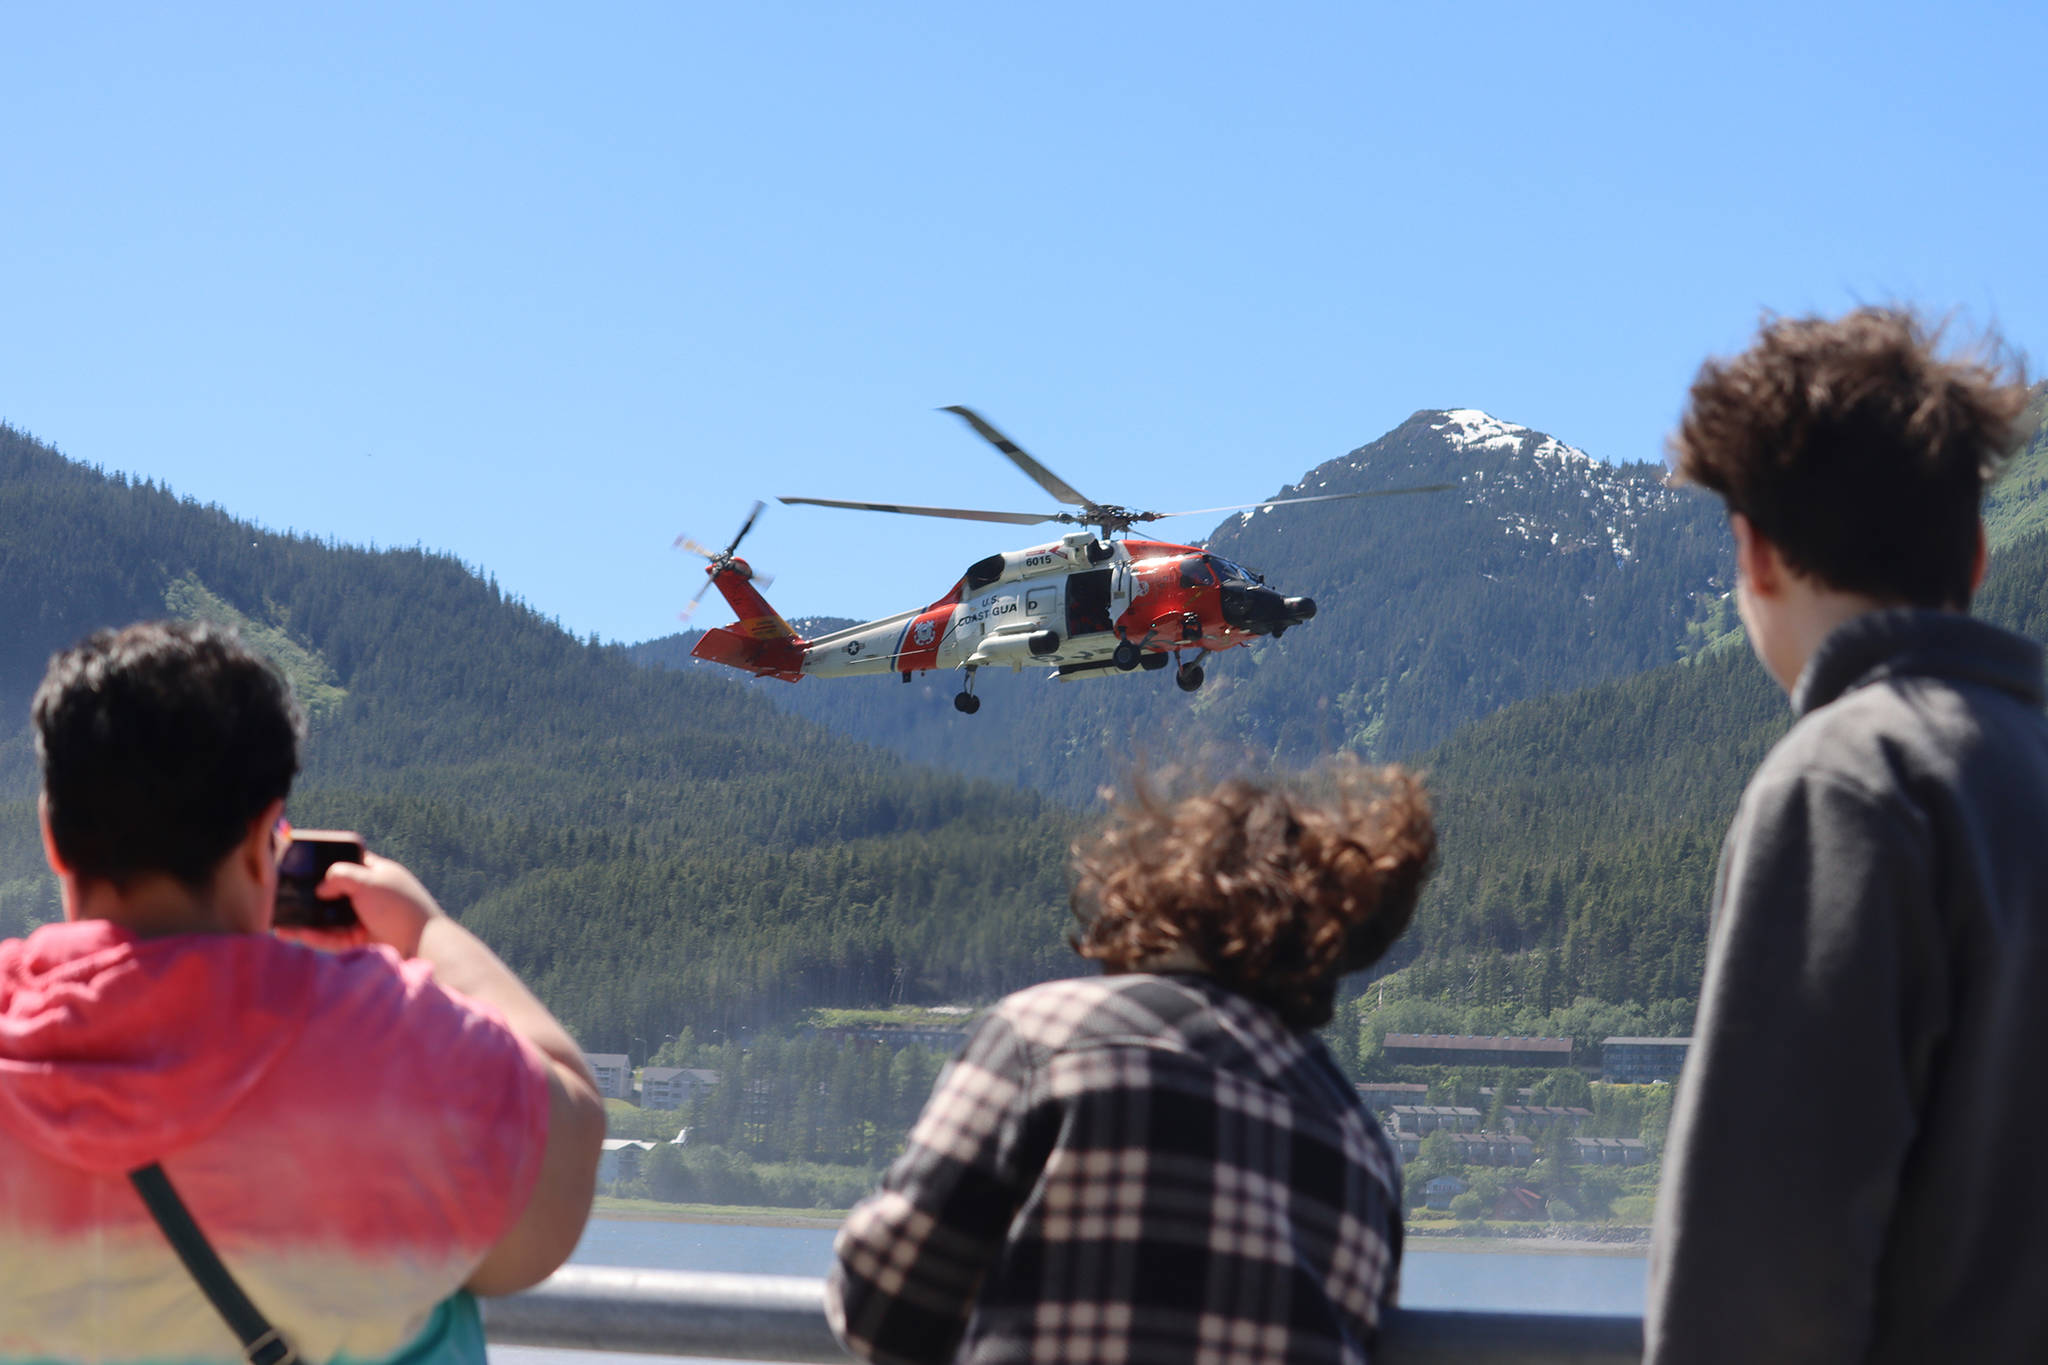 Onlookers watch a U.S. Coast Guard rescue demonstration Saturday in the Gastineau Channel during the 11th Juneau Maritime Festival. The event attracted thousands of people to Juneau for one of the first large, in-person events to be held in the capital city since the pandemic. (Ben Hohenstatt / Juneau Empire)